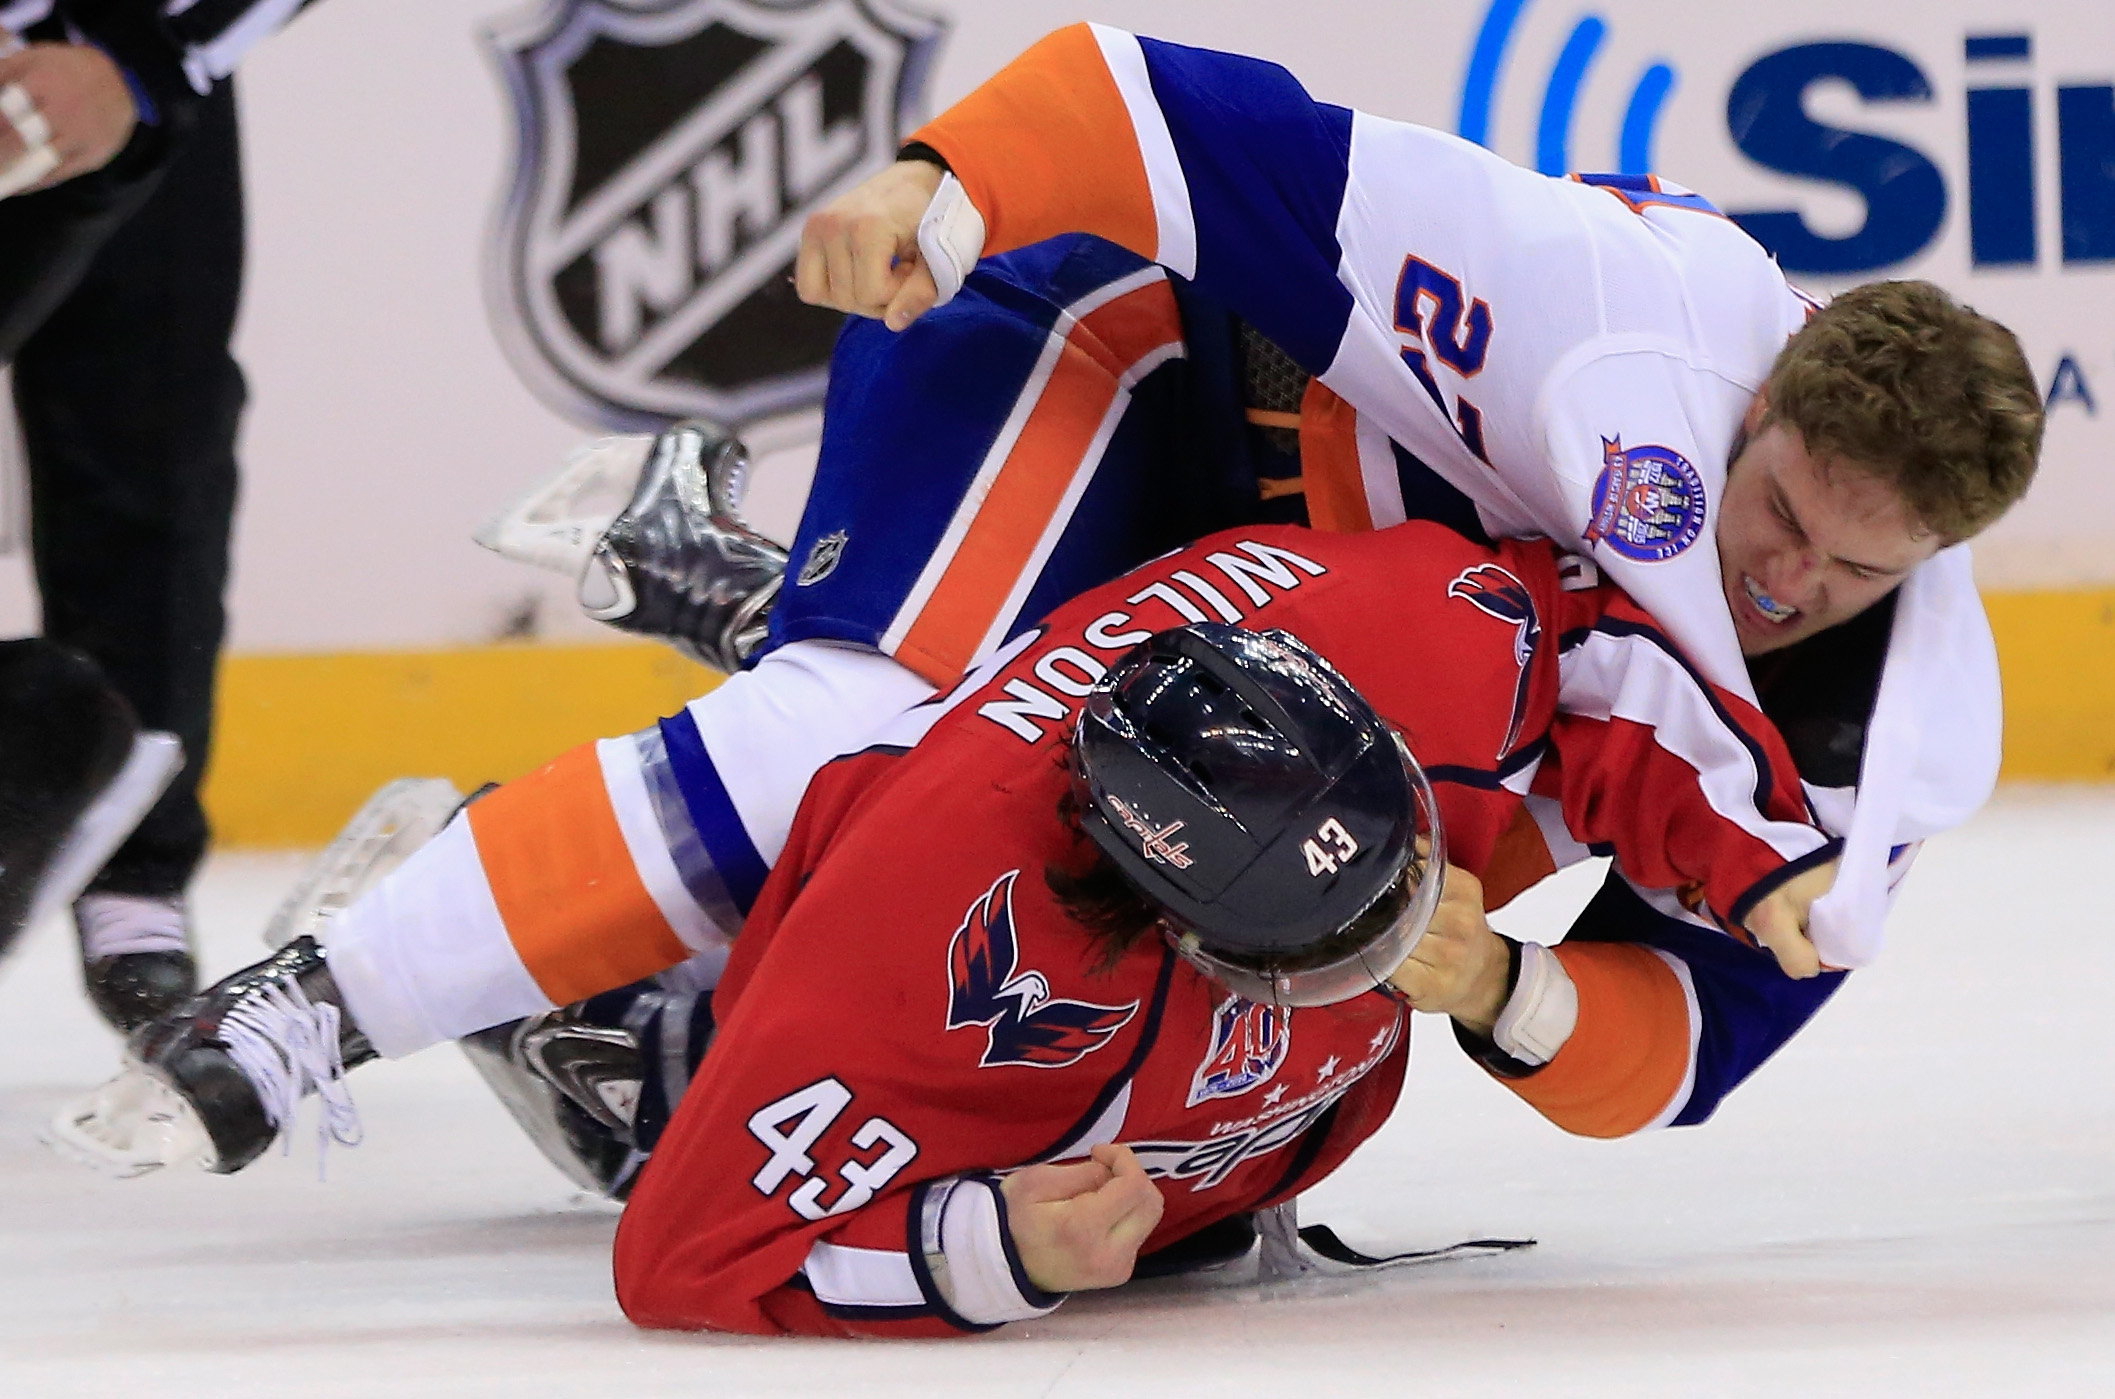 Islanders' Anders Lee goes after Capitals' Tom Wilson for controversial hit  | For The Win